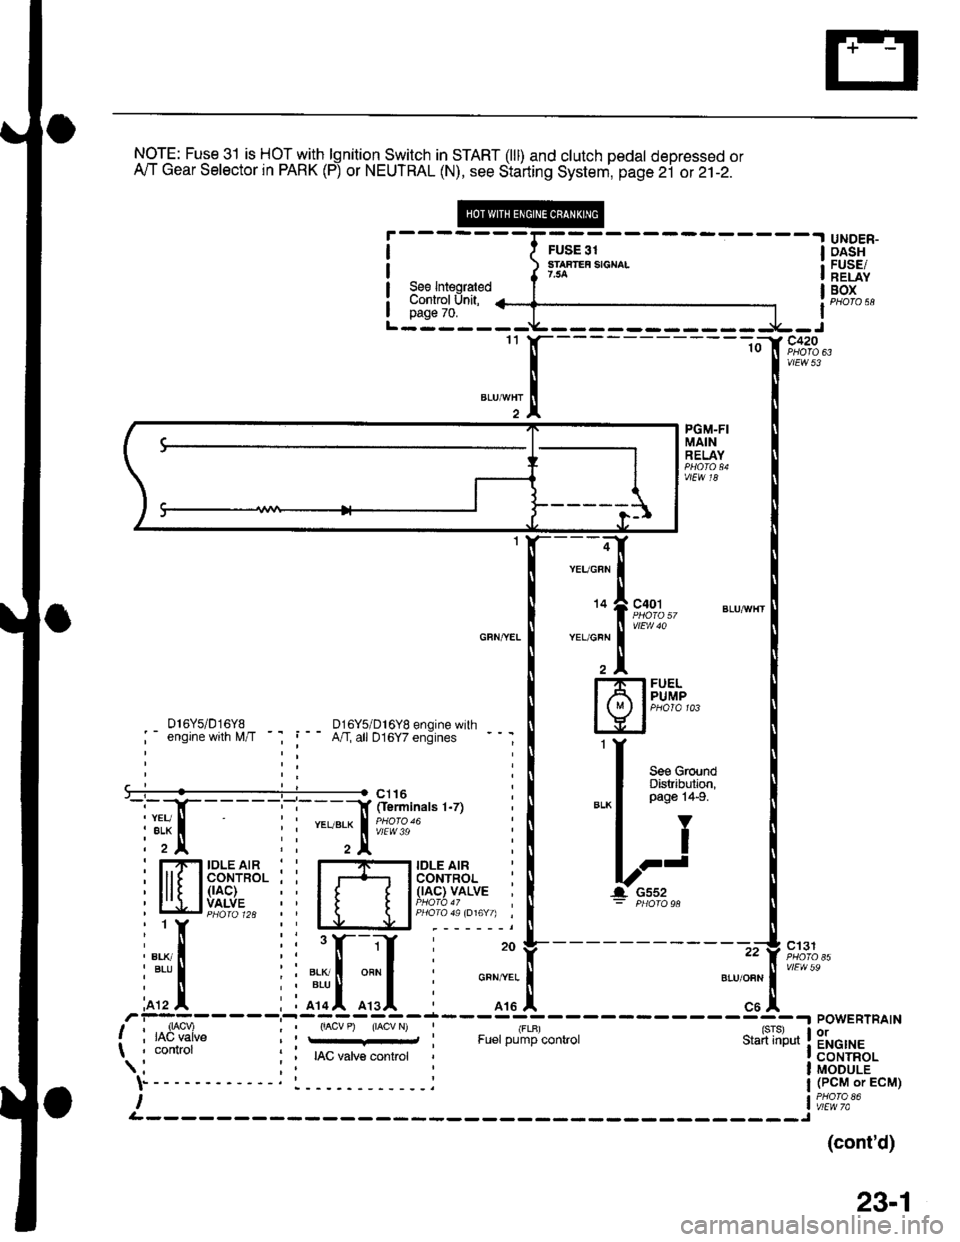 HONDA CIVIC 1996 6.G Repair Manual NOT-E: Fu^se.31 is HO-f-with lgnition Switch in START (tD and clutch pedat depressed orA"iT Gear Selector in PARK (P) or NEUTRAL (N), see Siarting Systeni, page 2i or 21-2.
See Int€oratedControl Jni